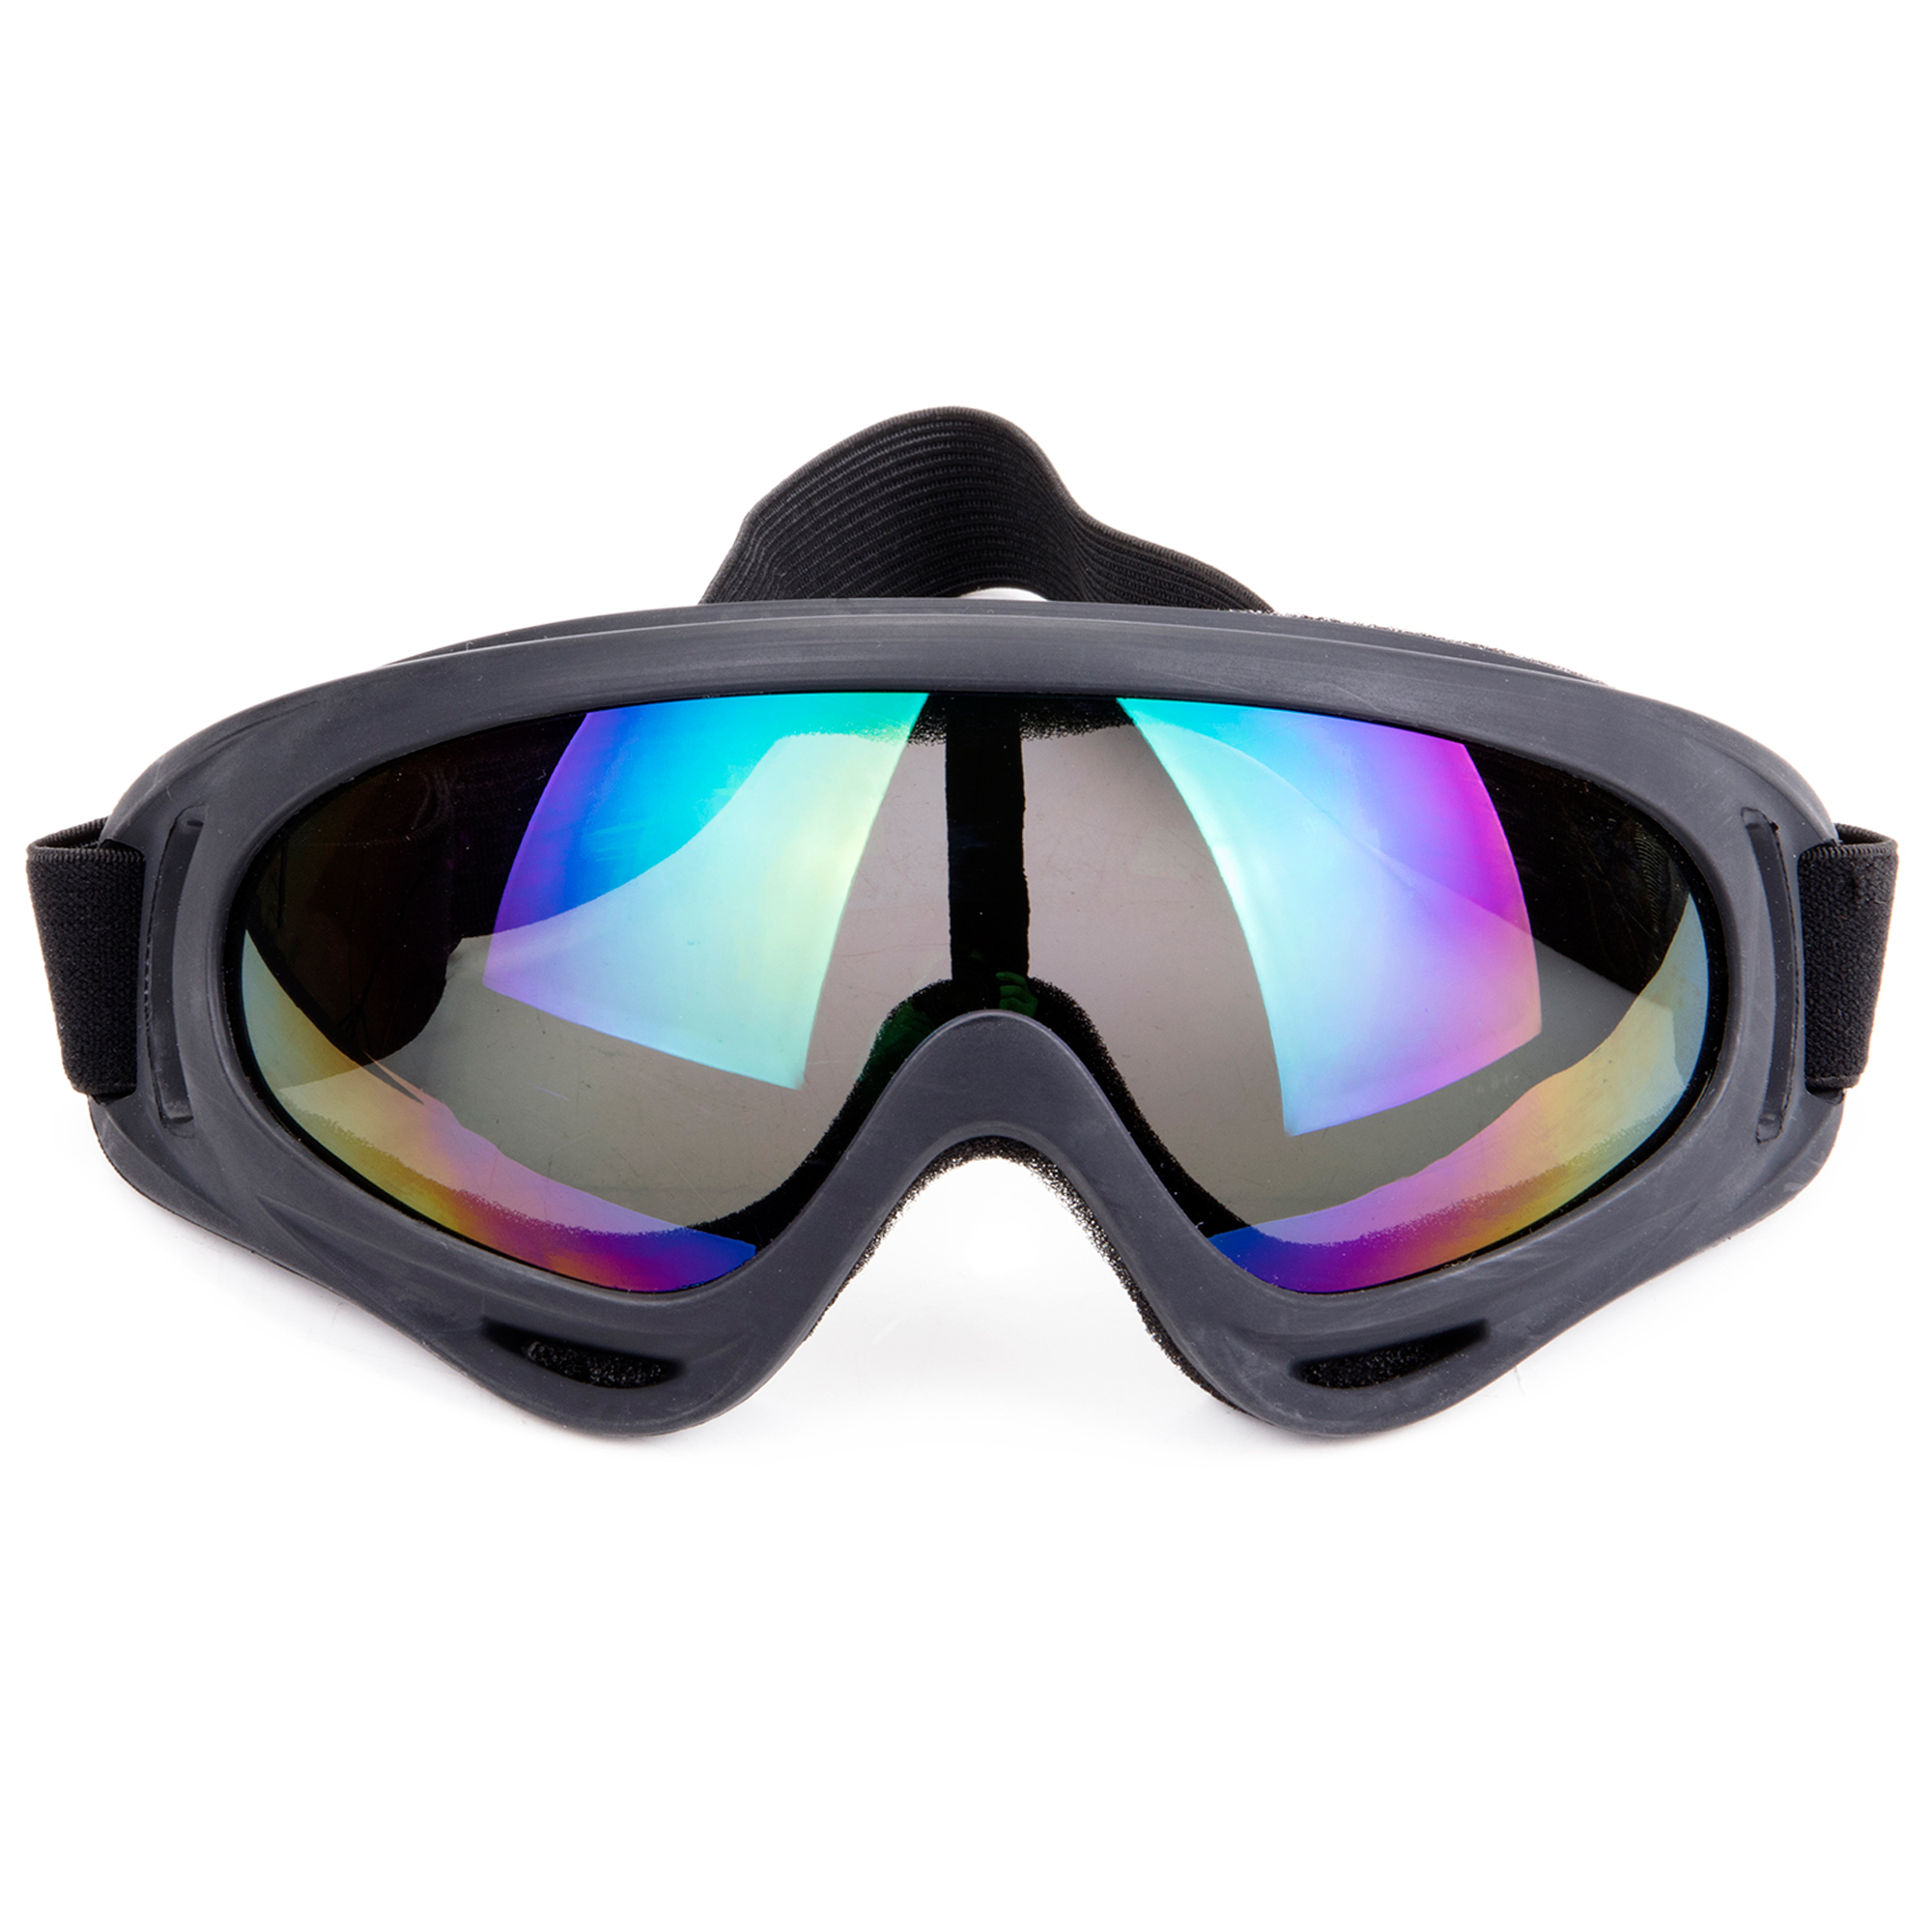 FOCUSSEXY Black and Multi-Color Snowboarding and Skiing Sport Goggles - image 2 of 8